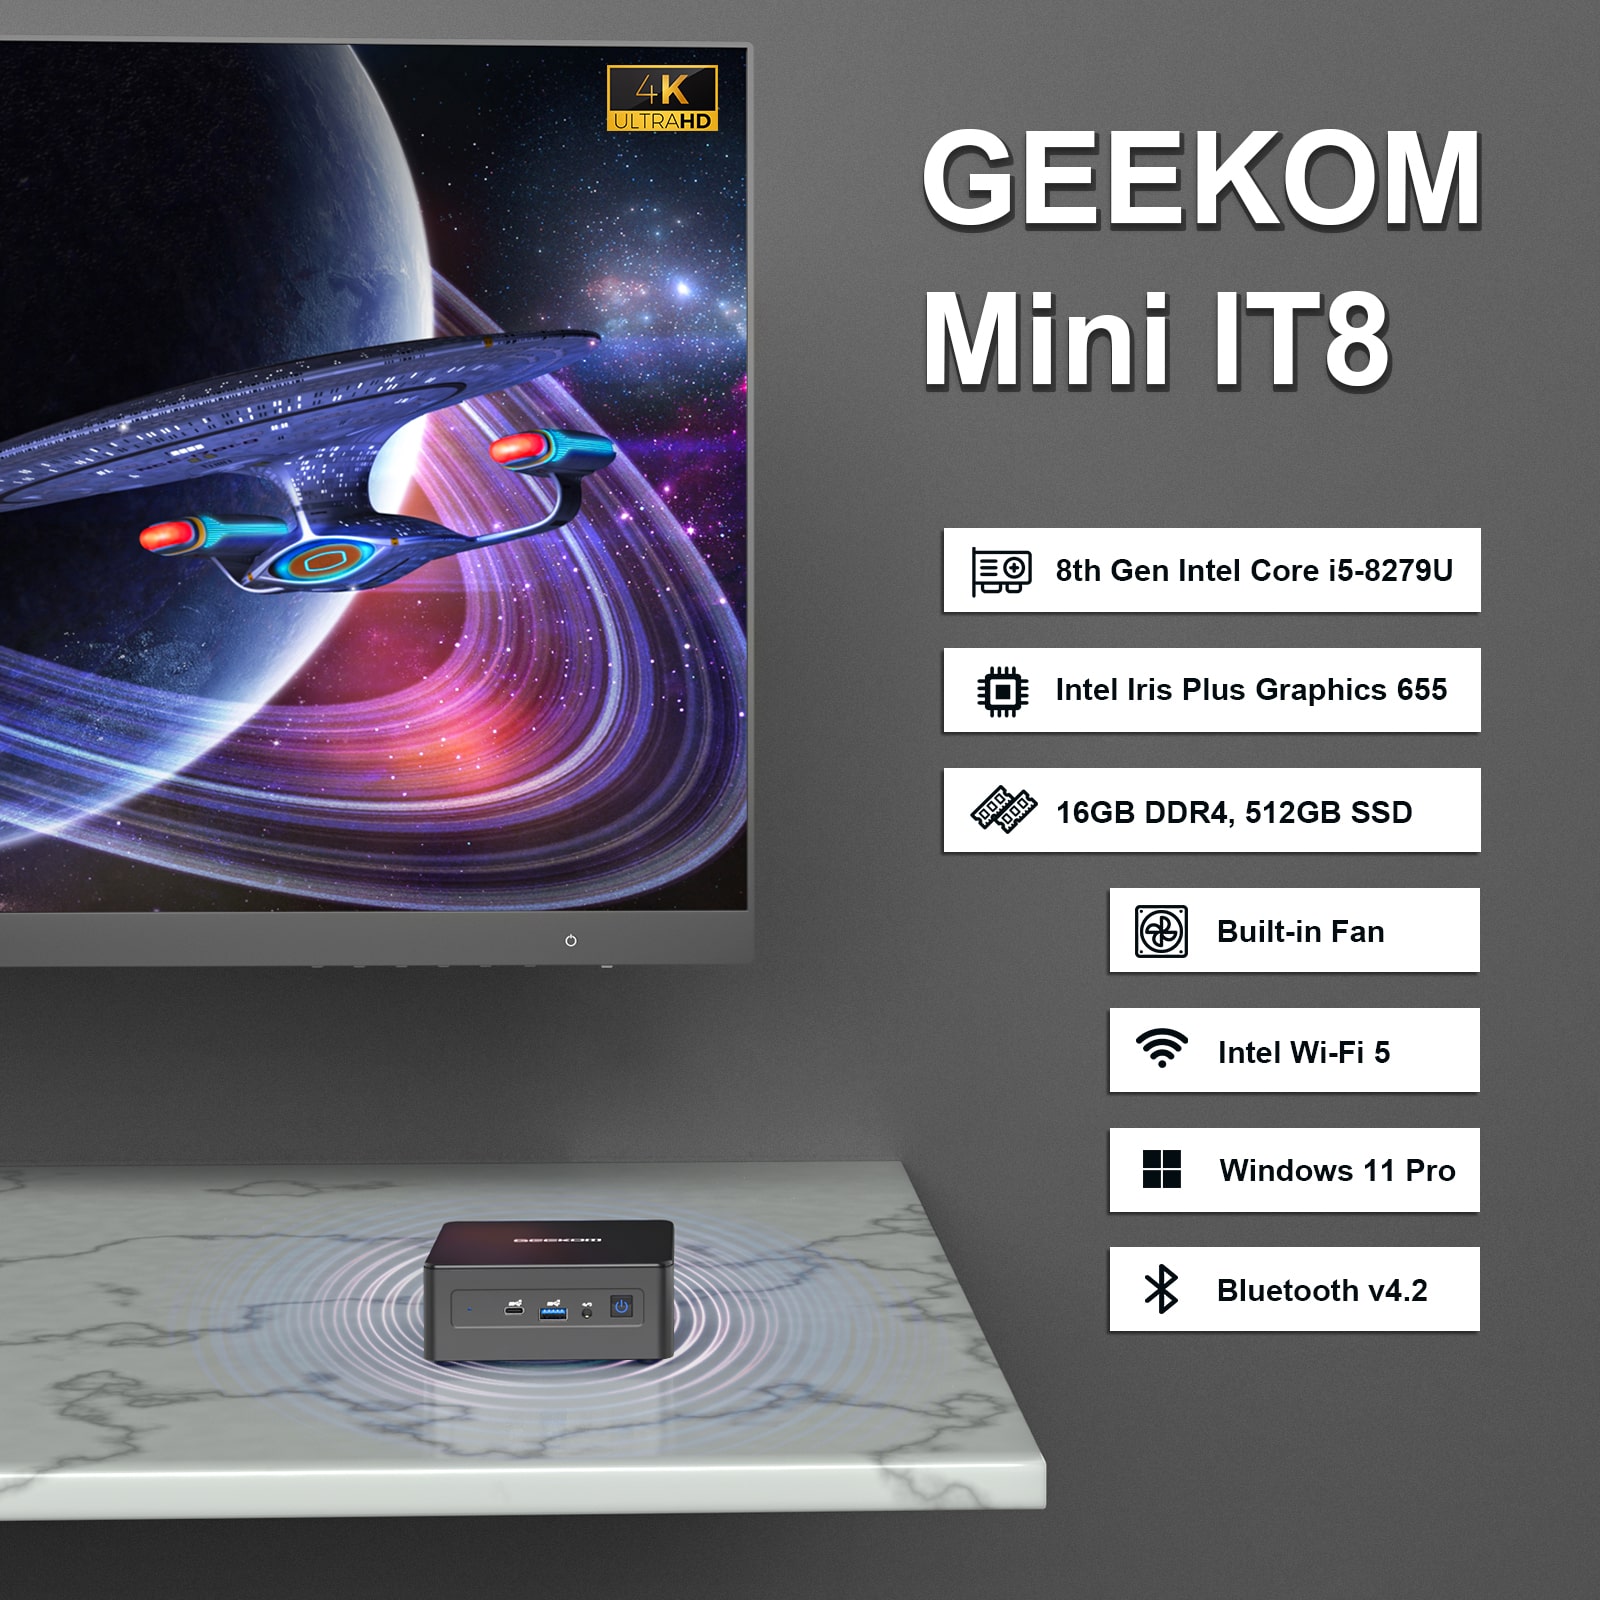 GEEKOM MINI IT8: Best 4K Small PC with Windows 11 for Sale